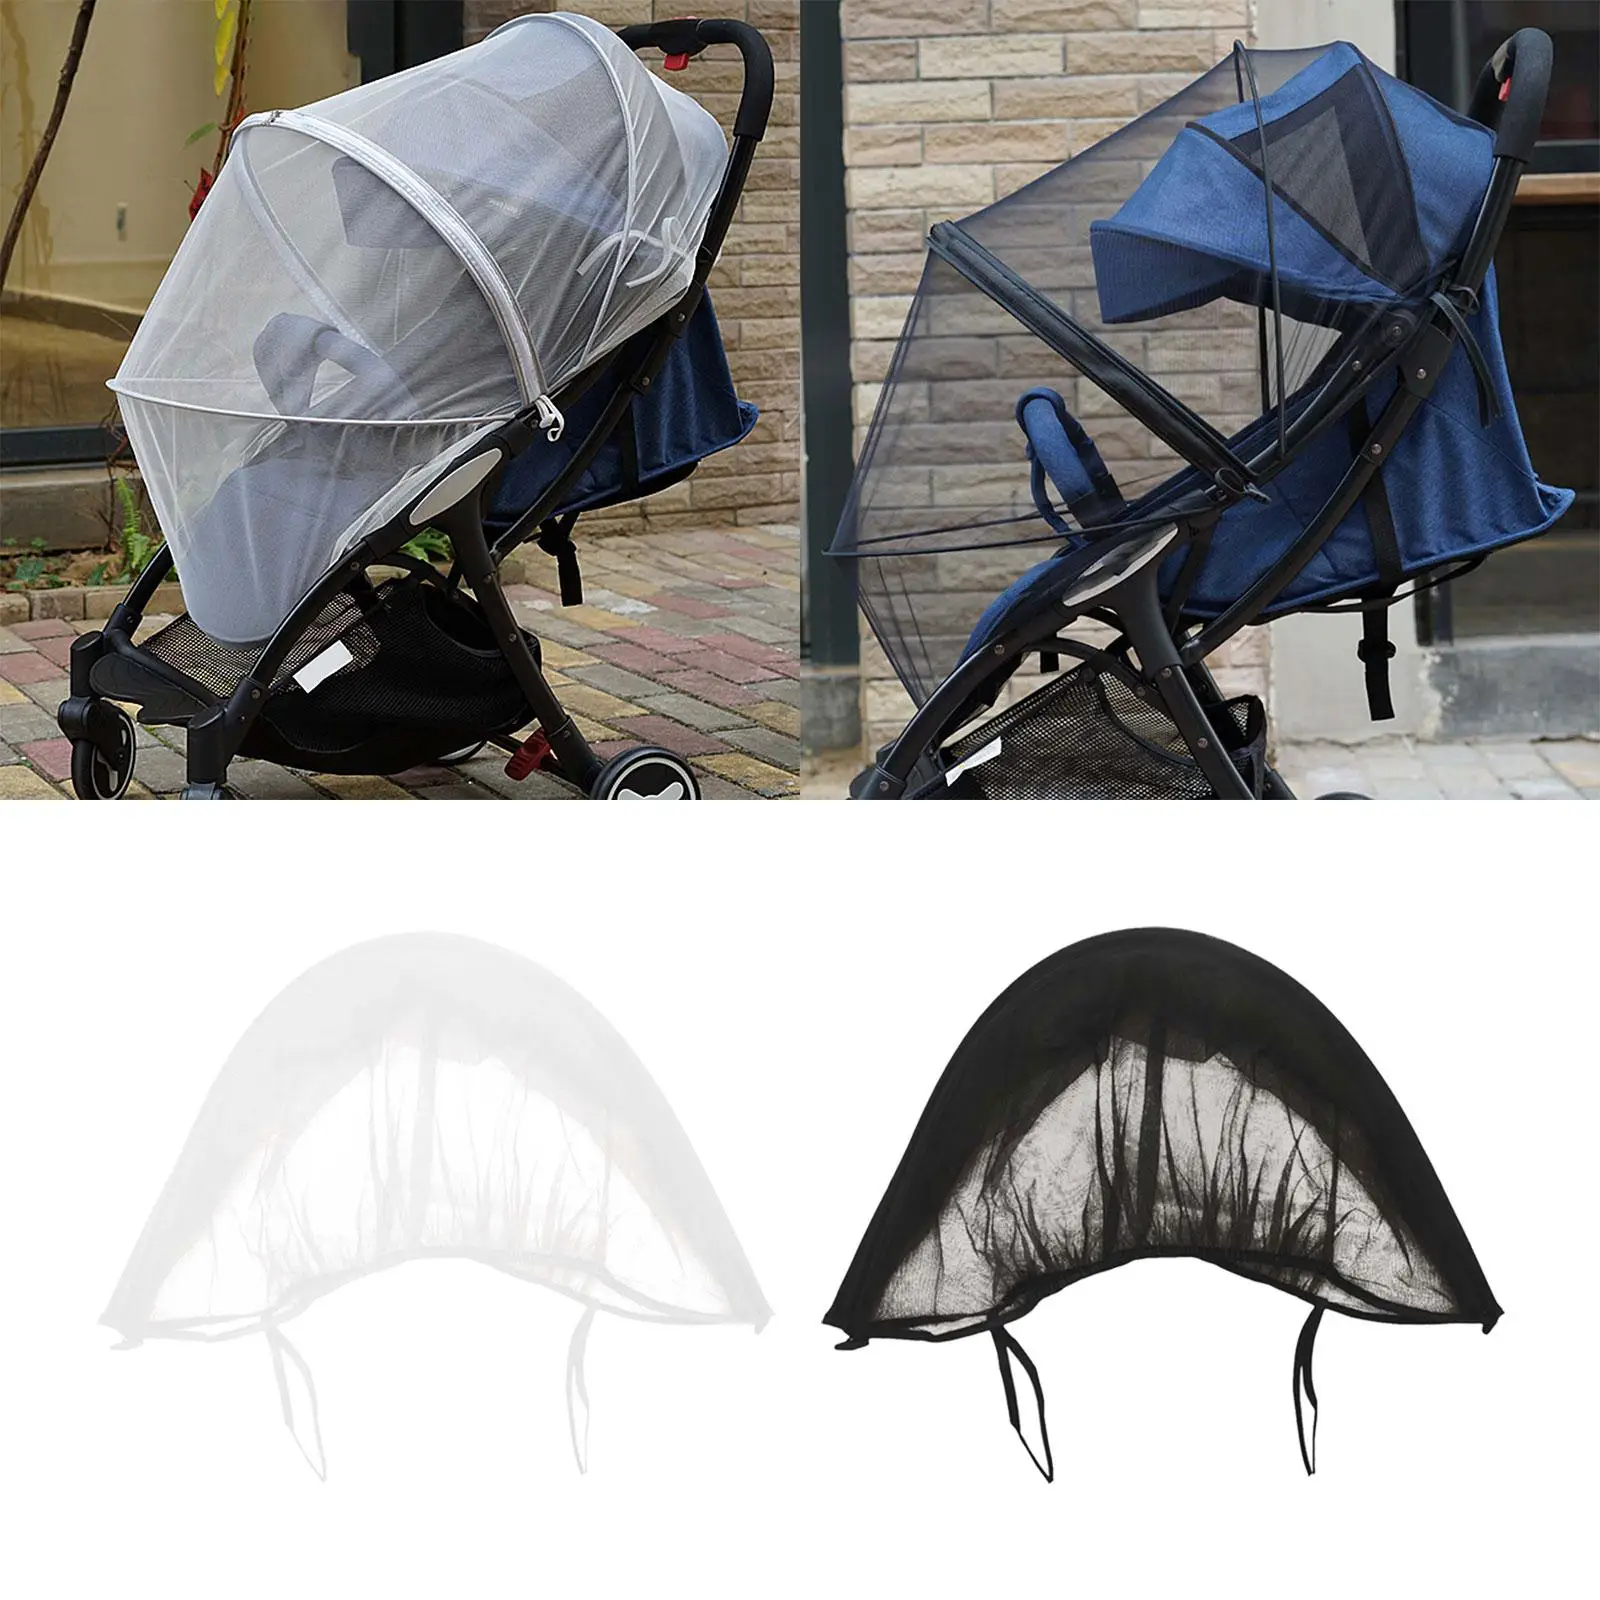 Universal Baby Stroller Mosquito Net Insect Shield Netting for Cot Strollers Durable Bug Net Sun Protection Jogging Stroller